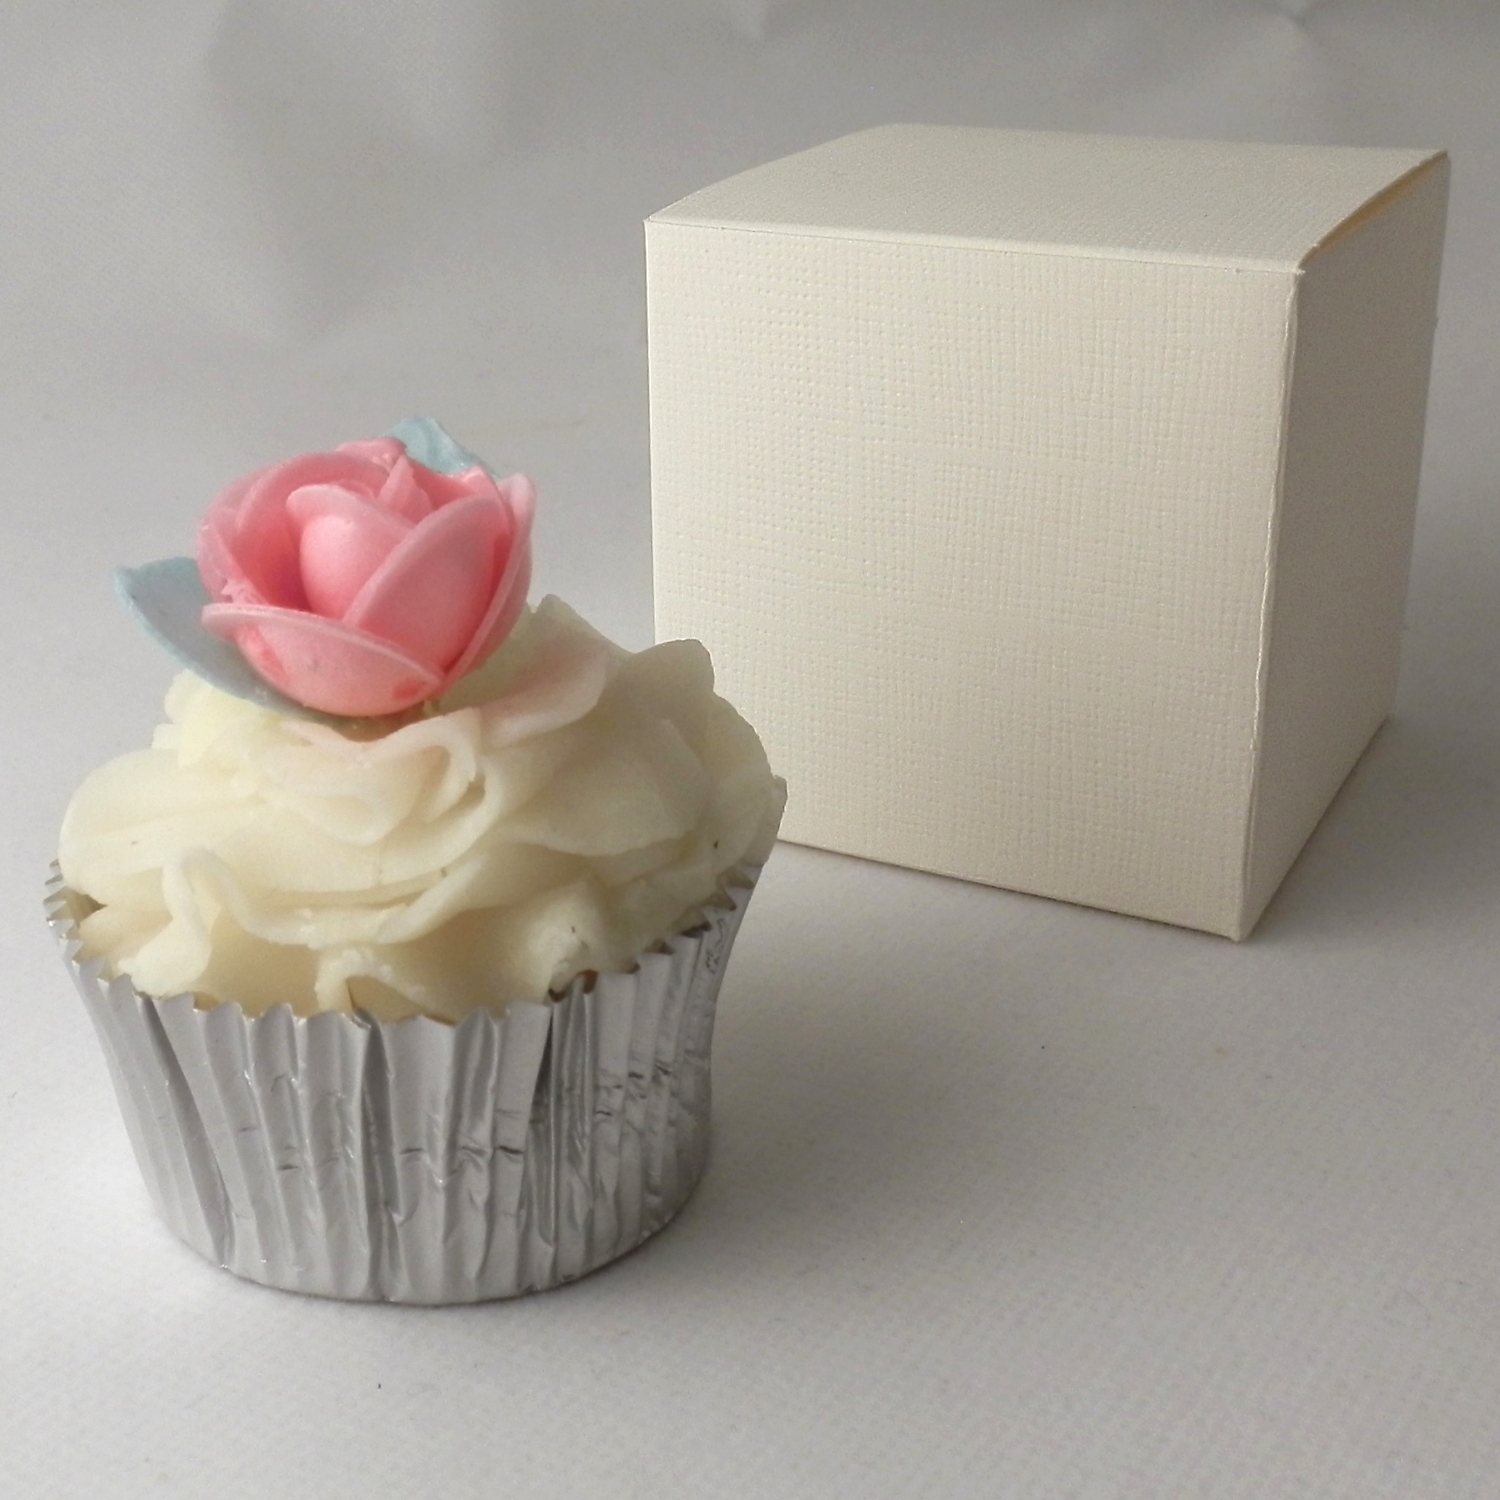 cupcake-boxes-for-1-cupcake-cupcake-shop-design-plain-canopy-pack-of-4